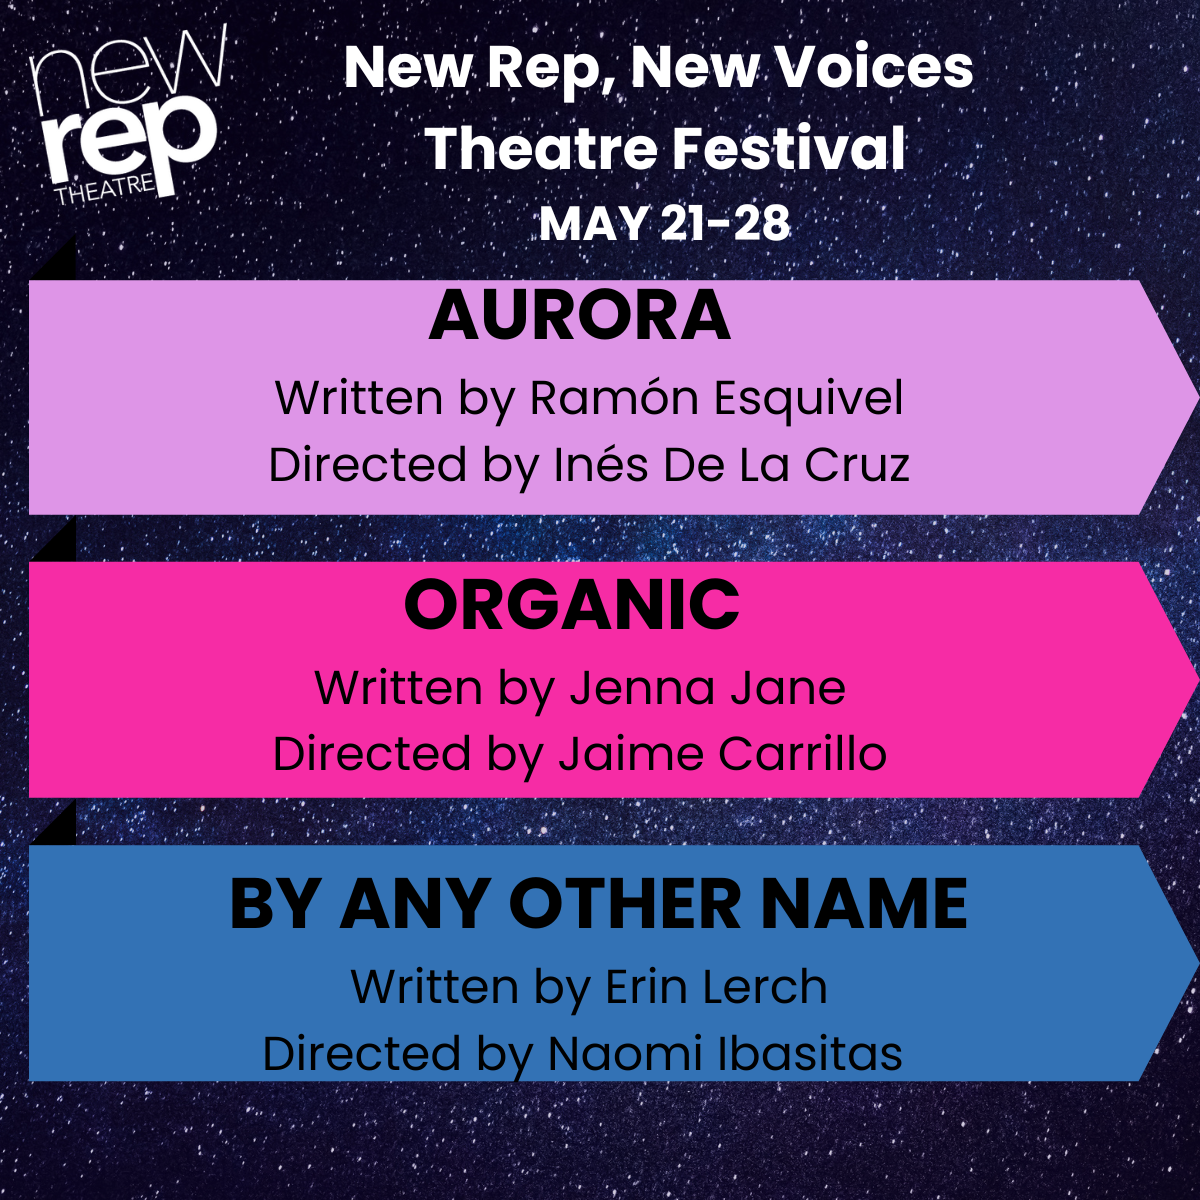 Image for New Rep, New Voices Theatre Festival